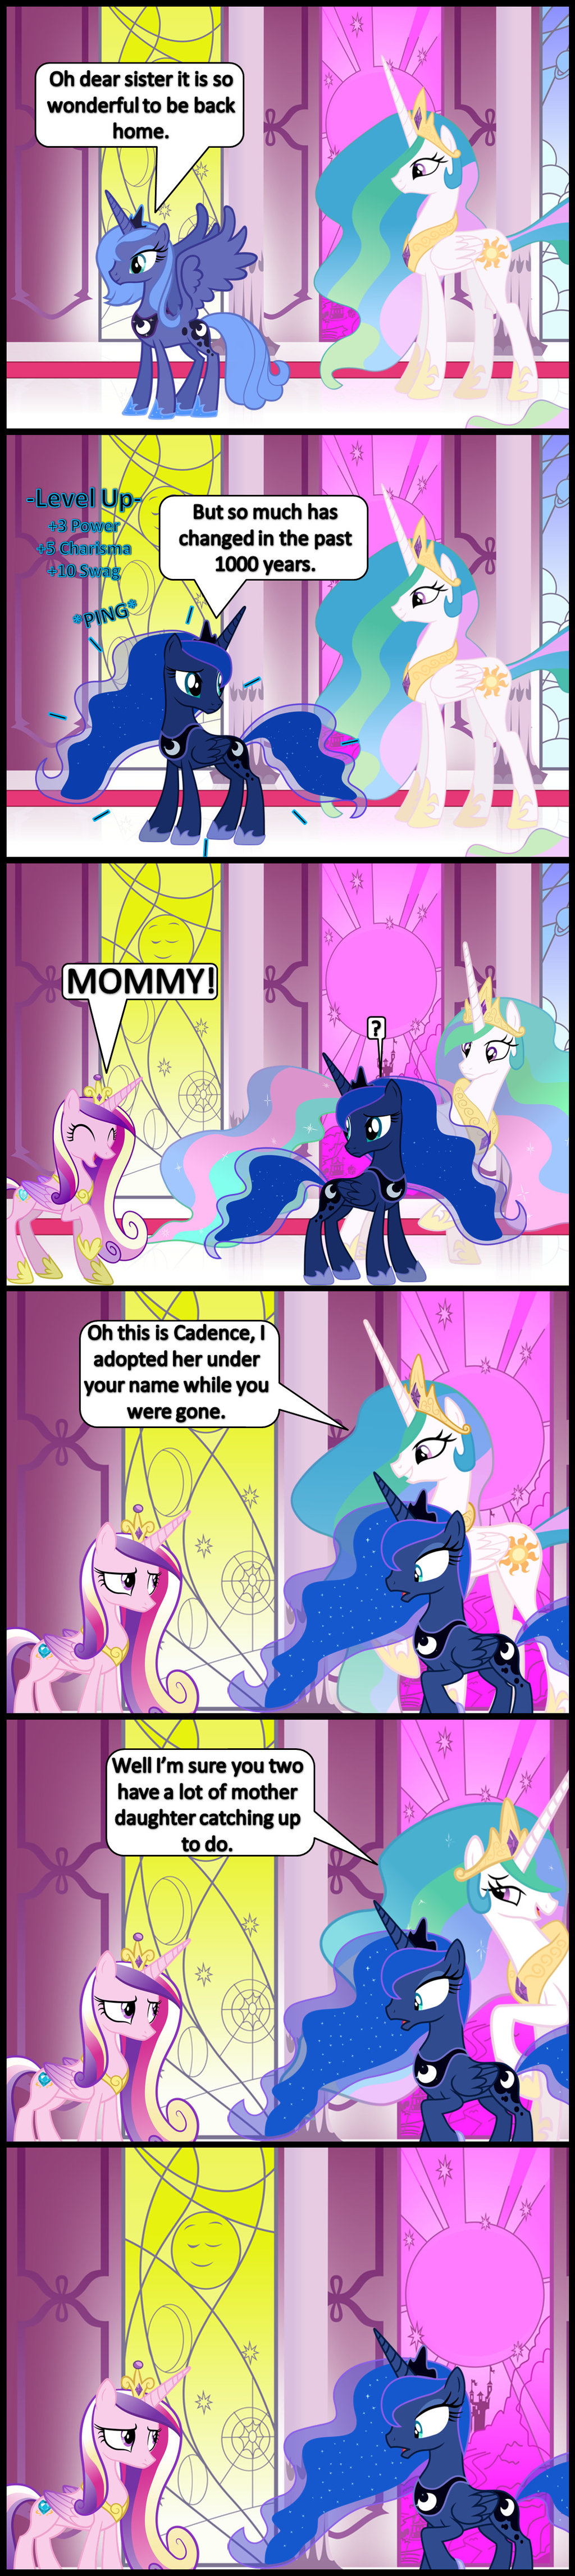 how_do_you_adopt_a_niece__by_bronybyexce